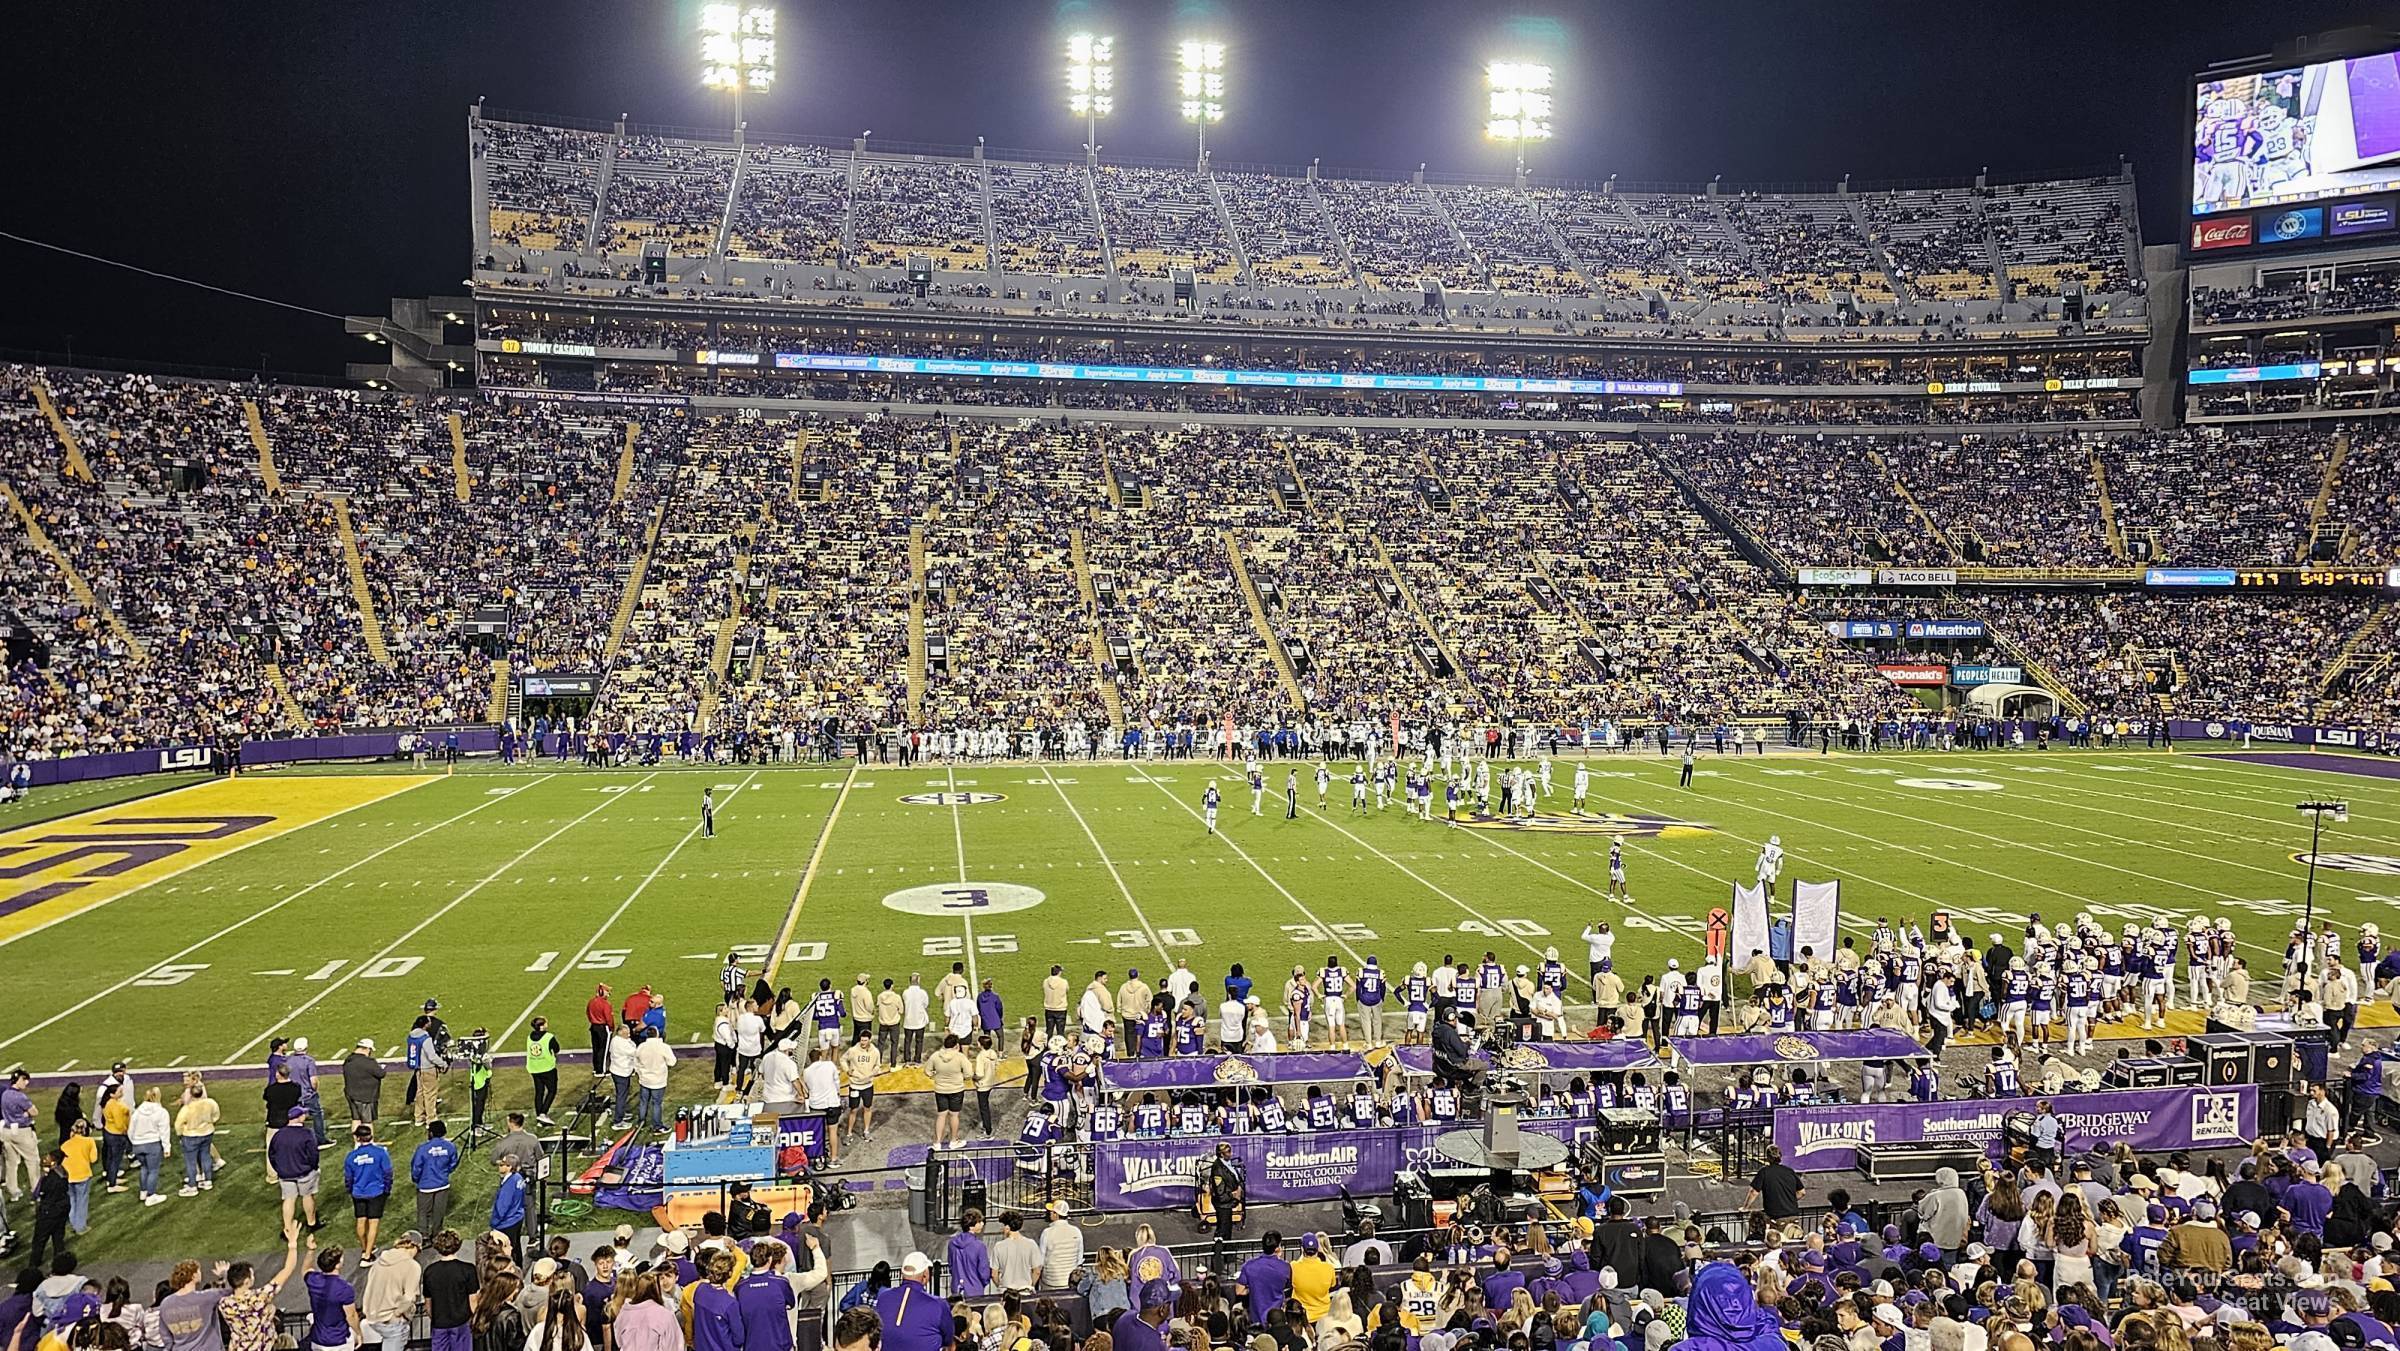 section 105, row 26 seat view  - tiger stadium